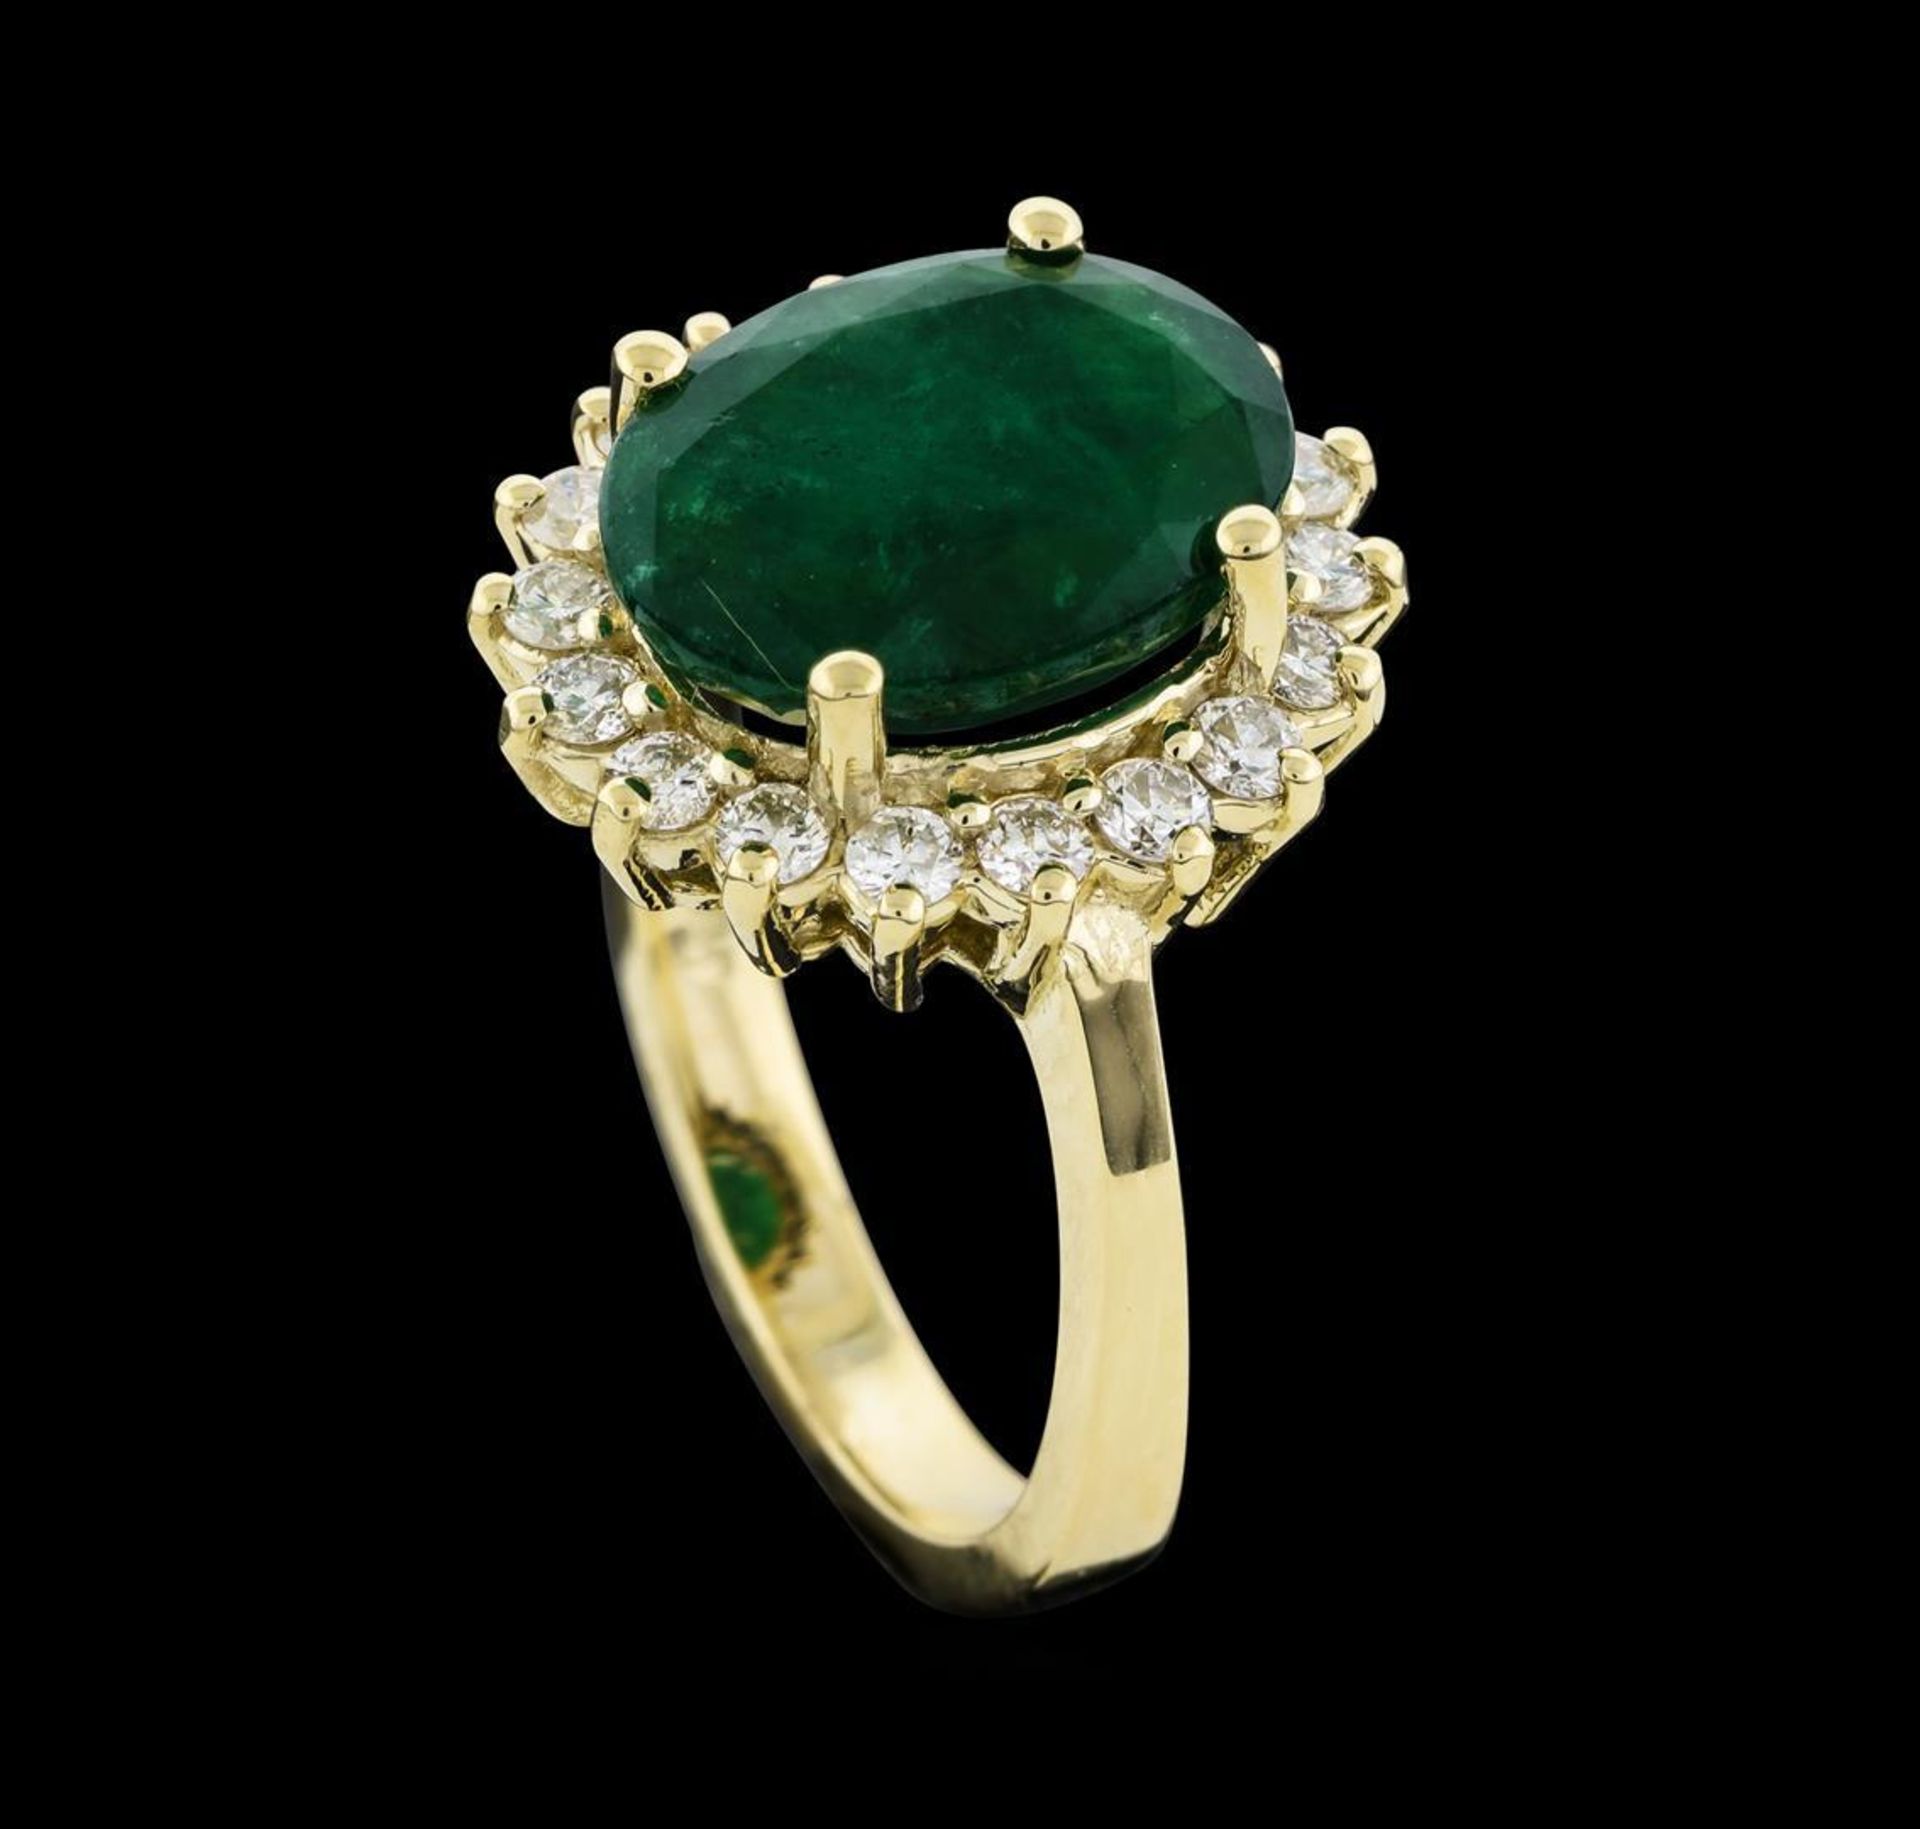 4.41 ctw Emerald and Diamond Ring - 14KT Yellow Gold - Image 4 of 5